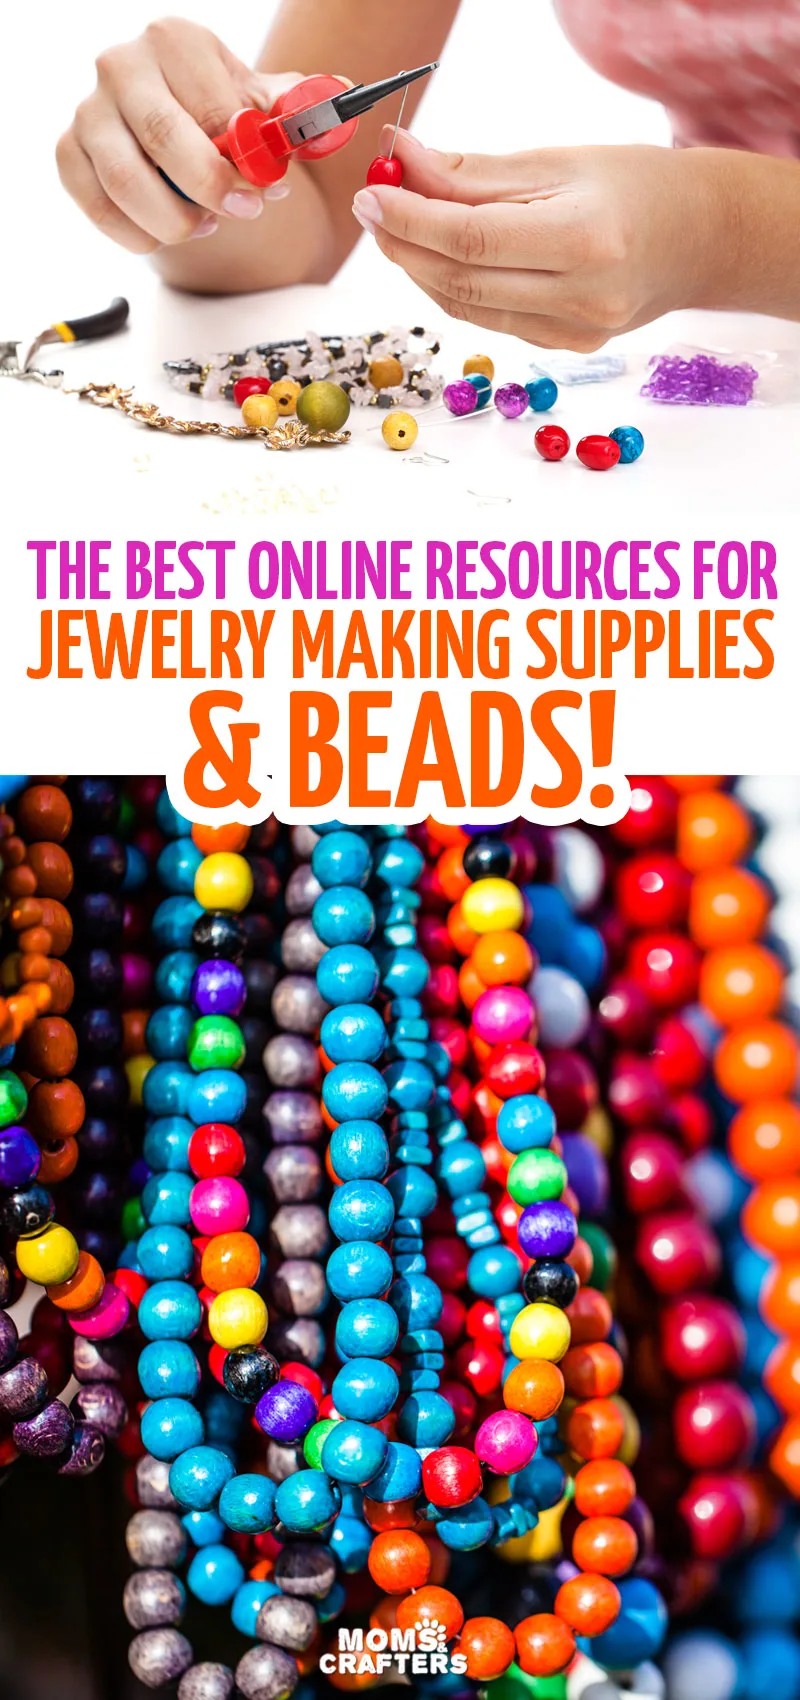 Click for some of the best places to buy beads onliine -and tips for beading and jewelry making beginners!